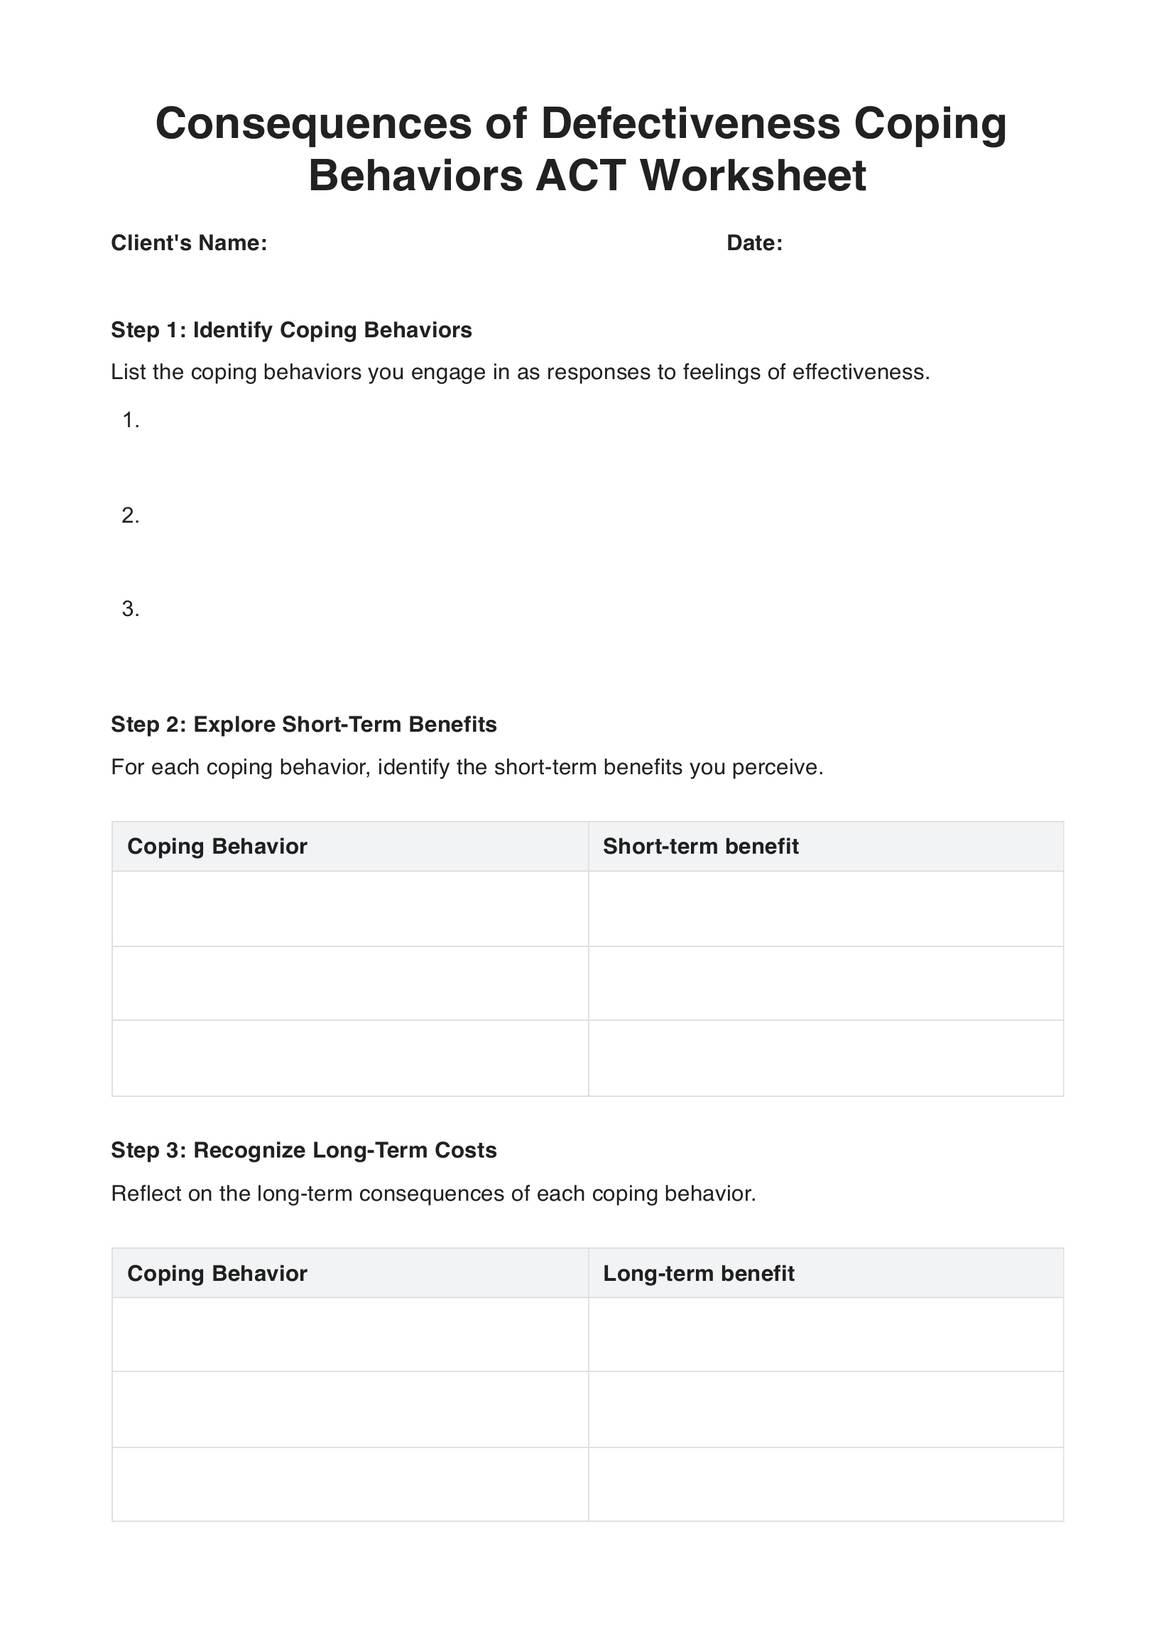 Consequences of Defectiveness Coping Behaviors ACT Worksheet PDF Example